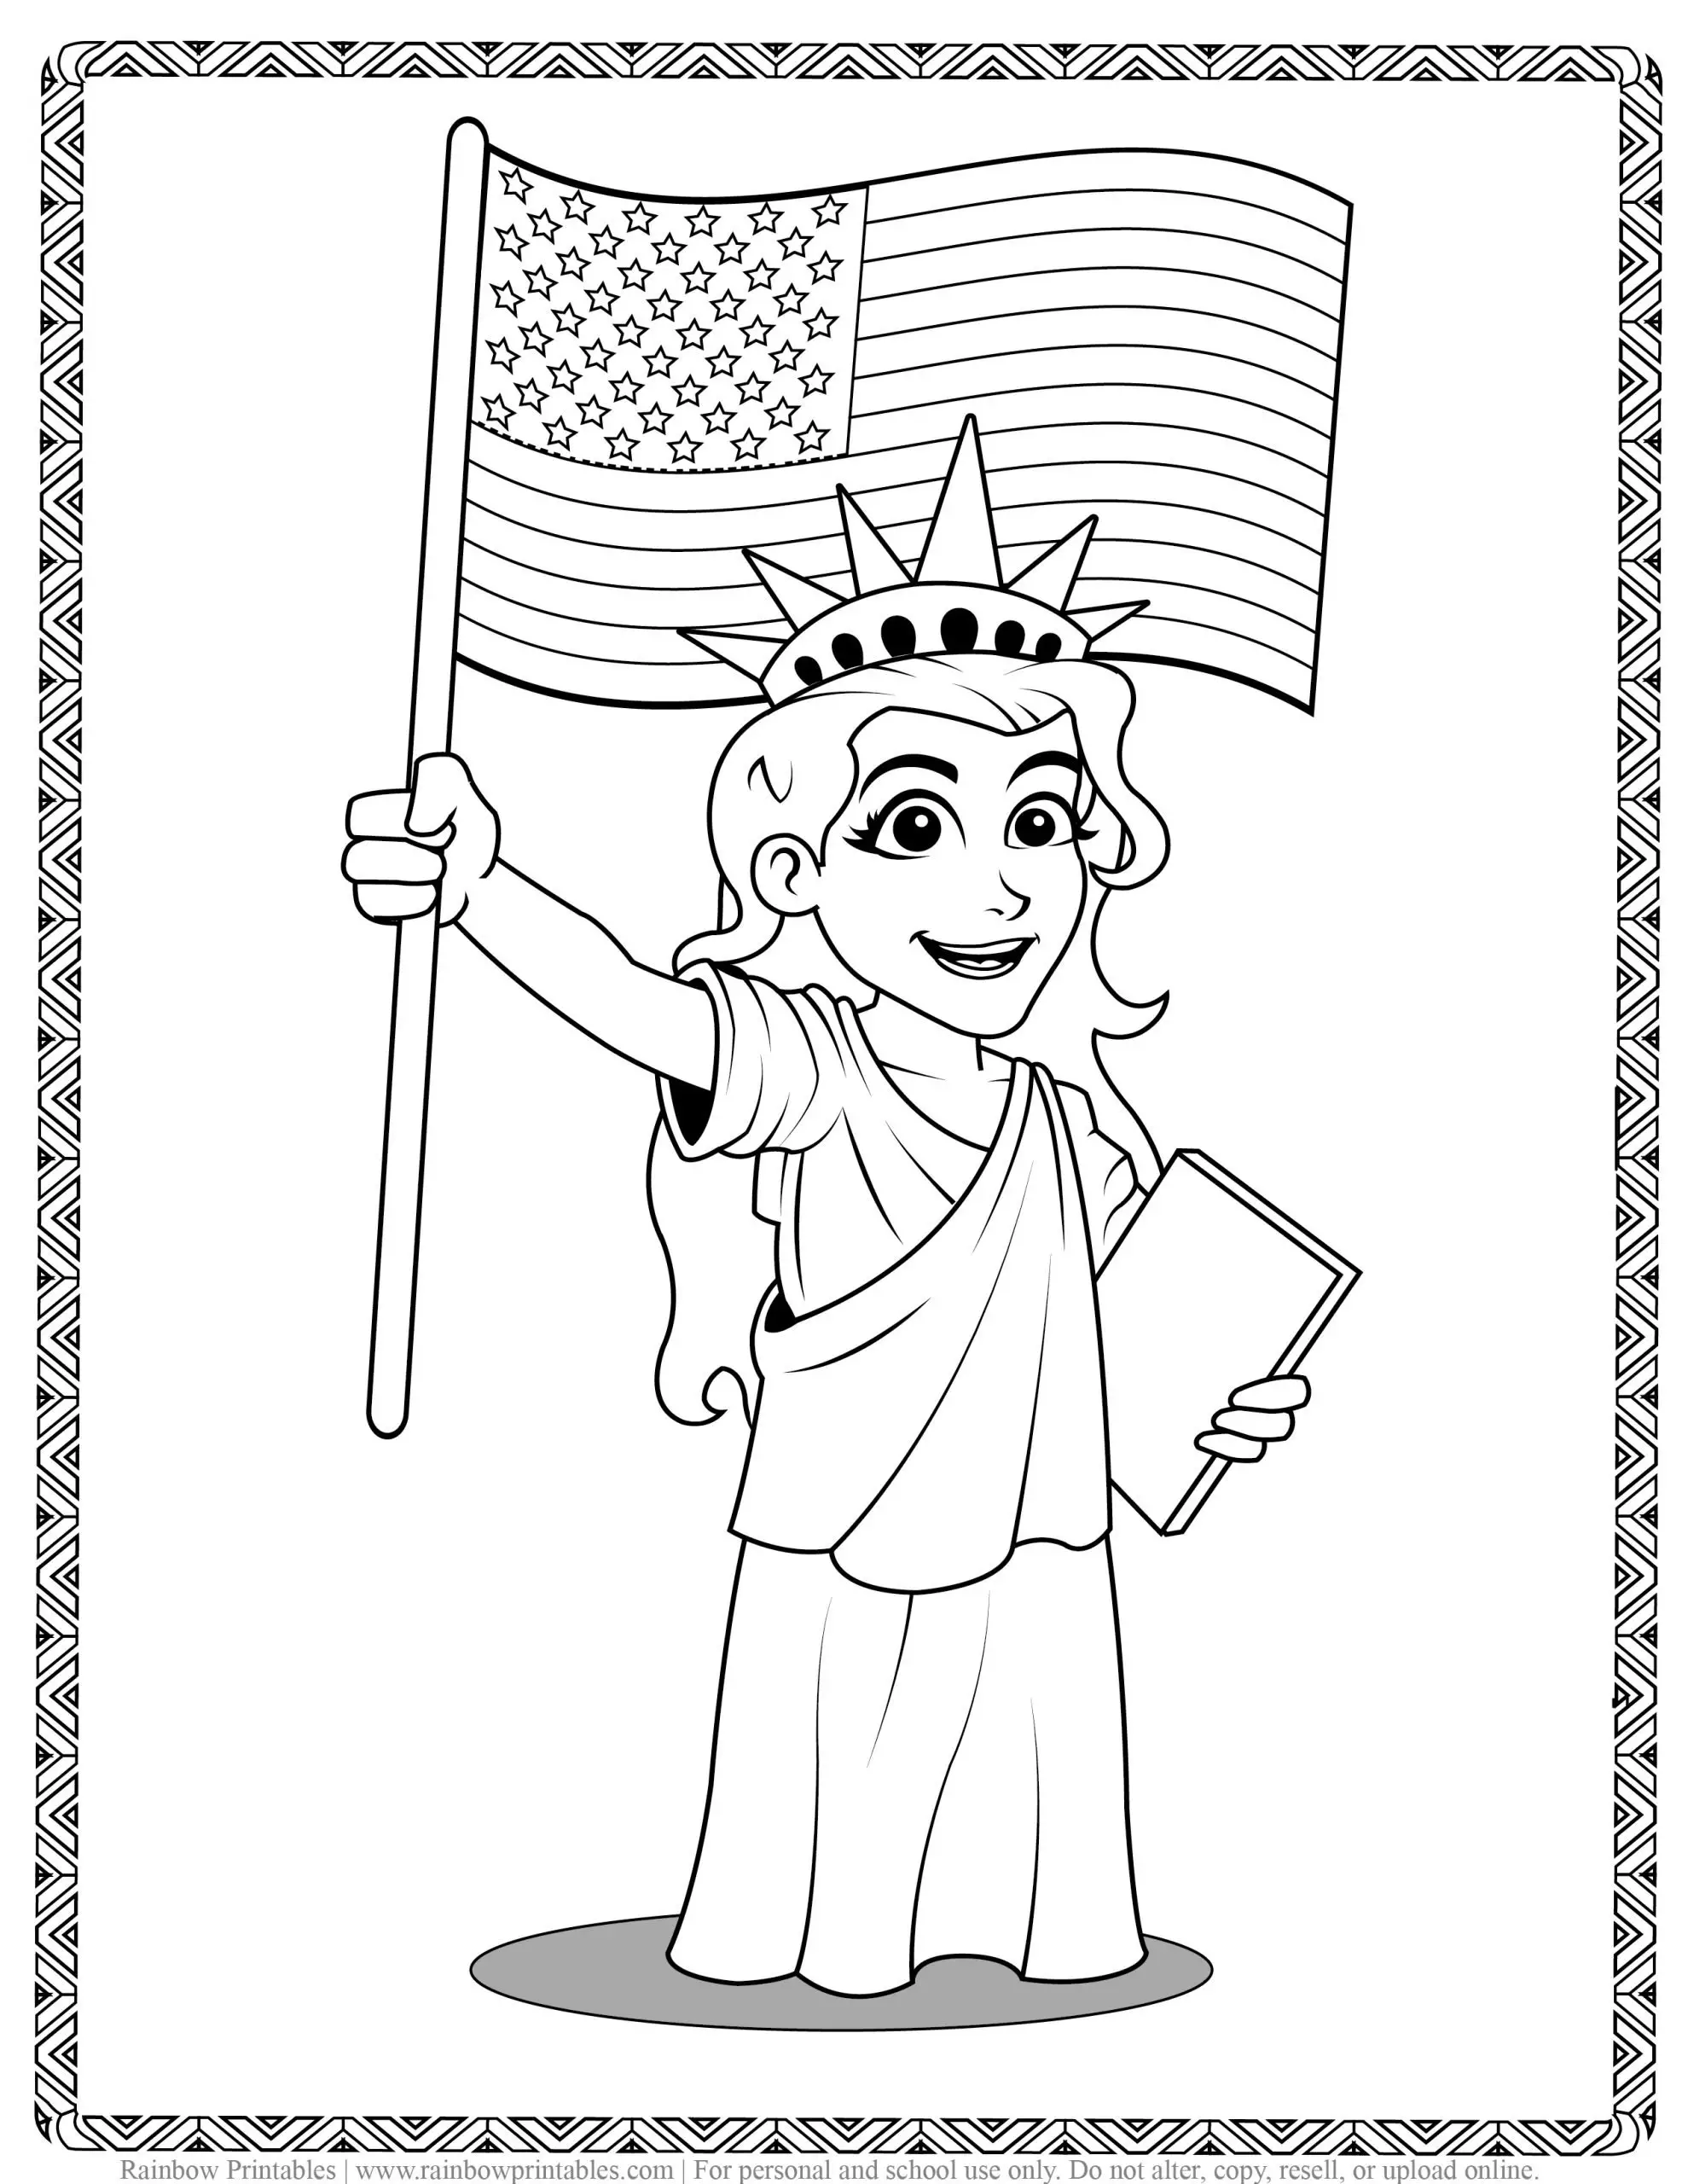 American Landmarks Lady Liberty Holding Flag Kids Patriotic July 4th independence Day Printables for Children, Toddlers, Coloring Pages, Activity for Preschool